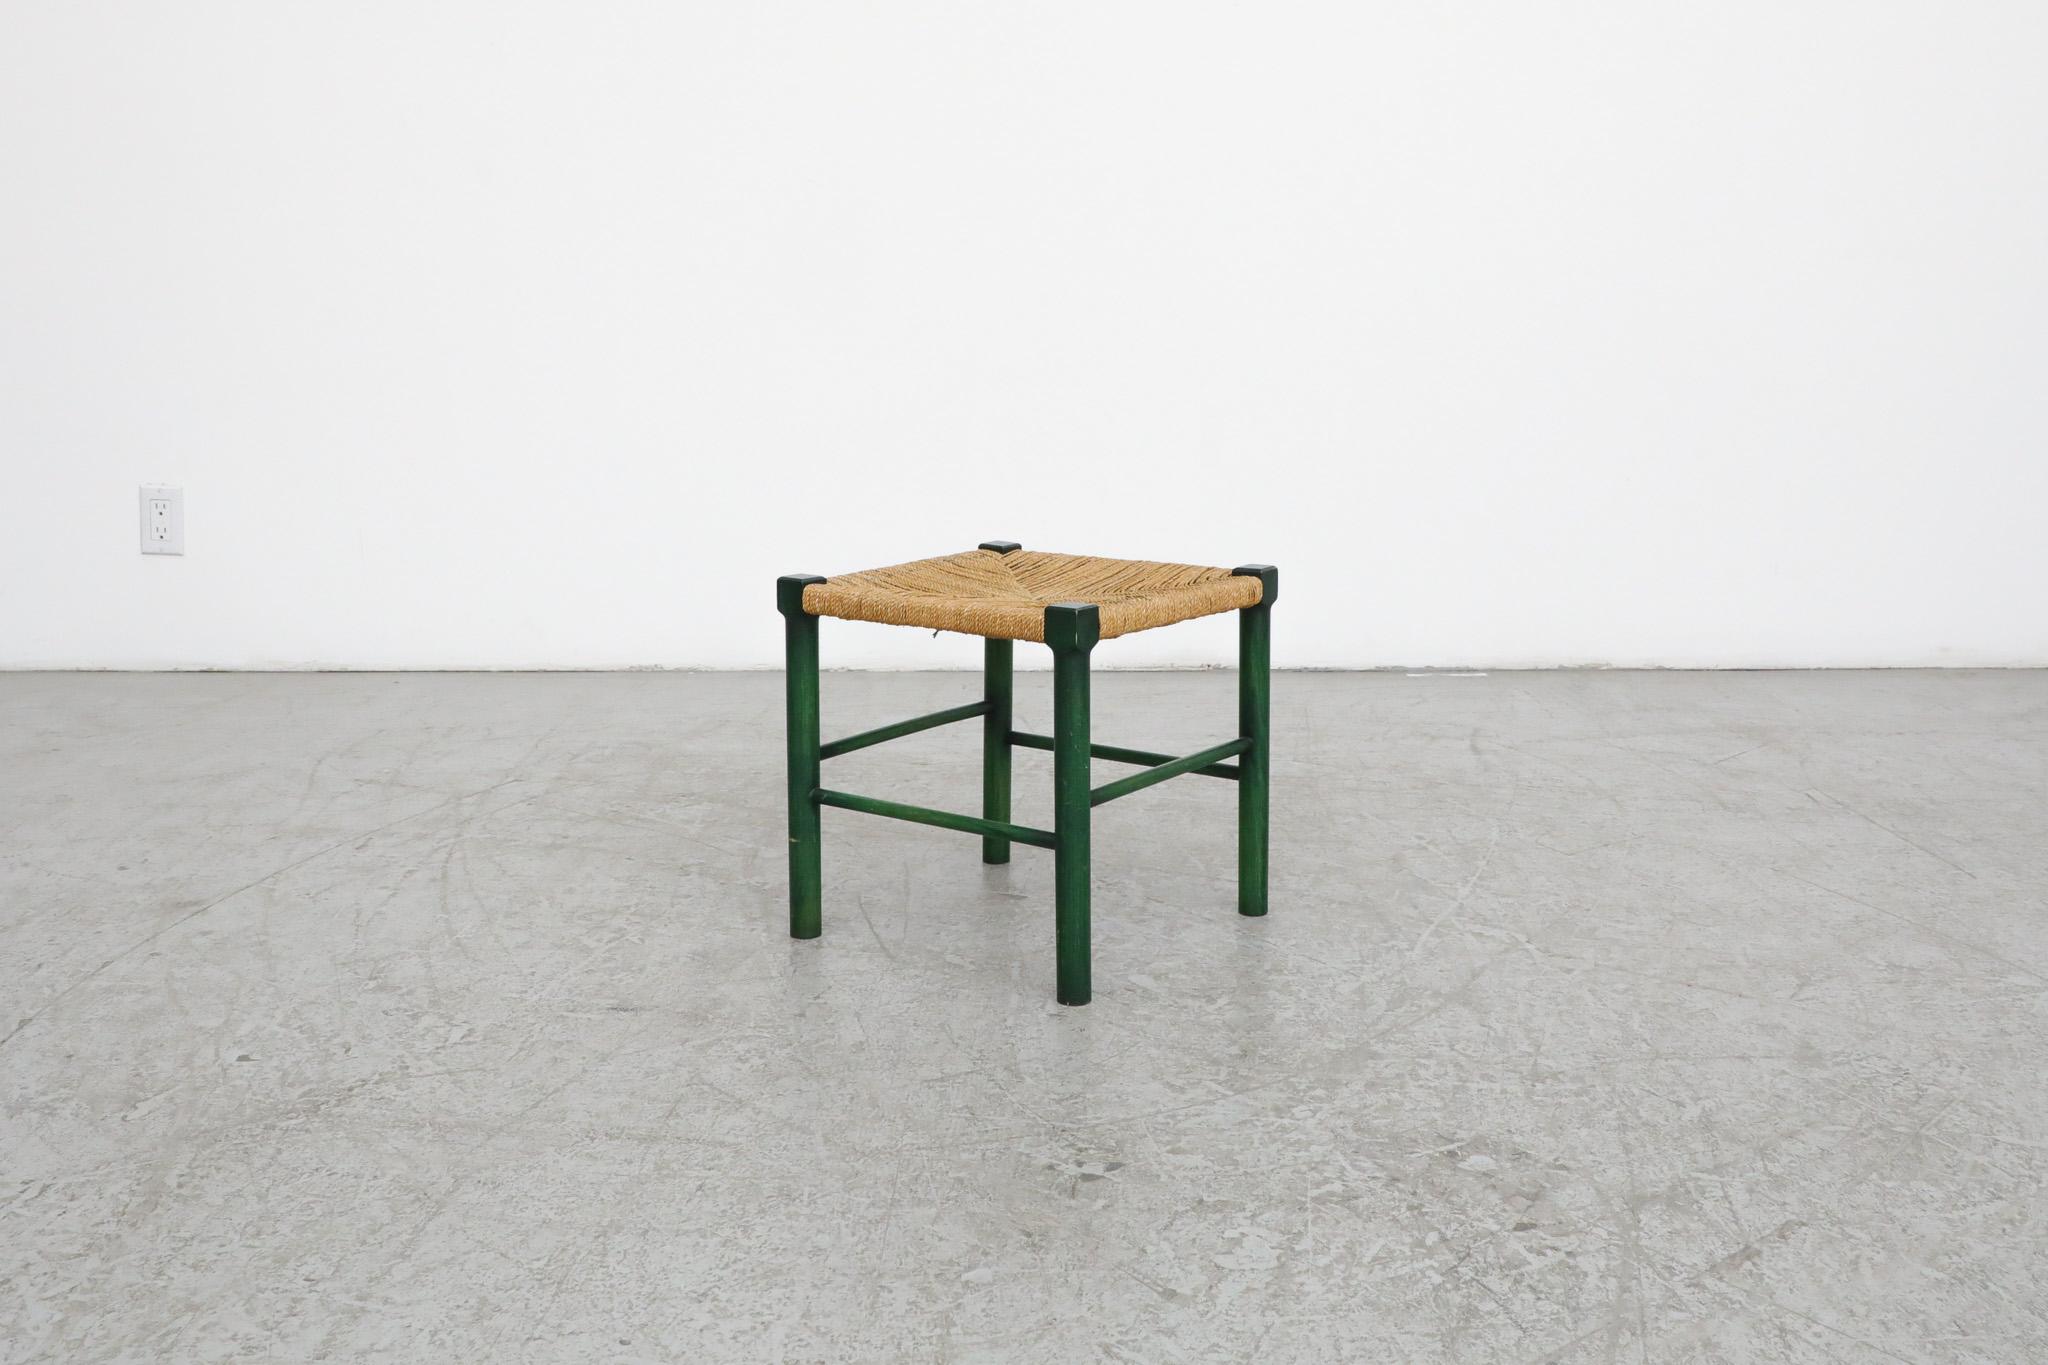 Single Mid-Century, green stained wood framed stool with hand-woven rope seat. Perfect little side table or light weight stool with some wear consistent with its age and light use. Similar stools also available and listed separately